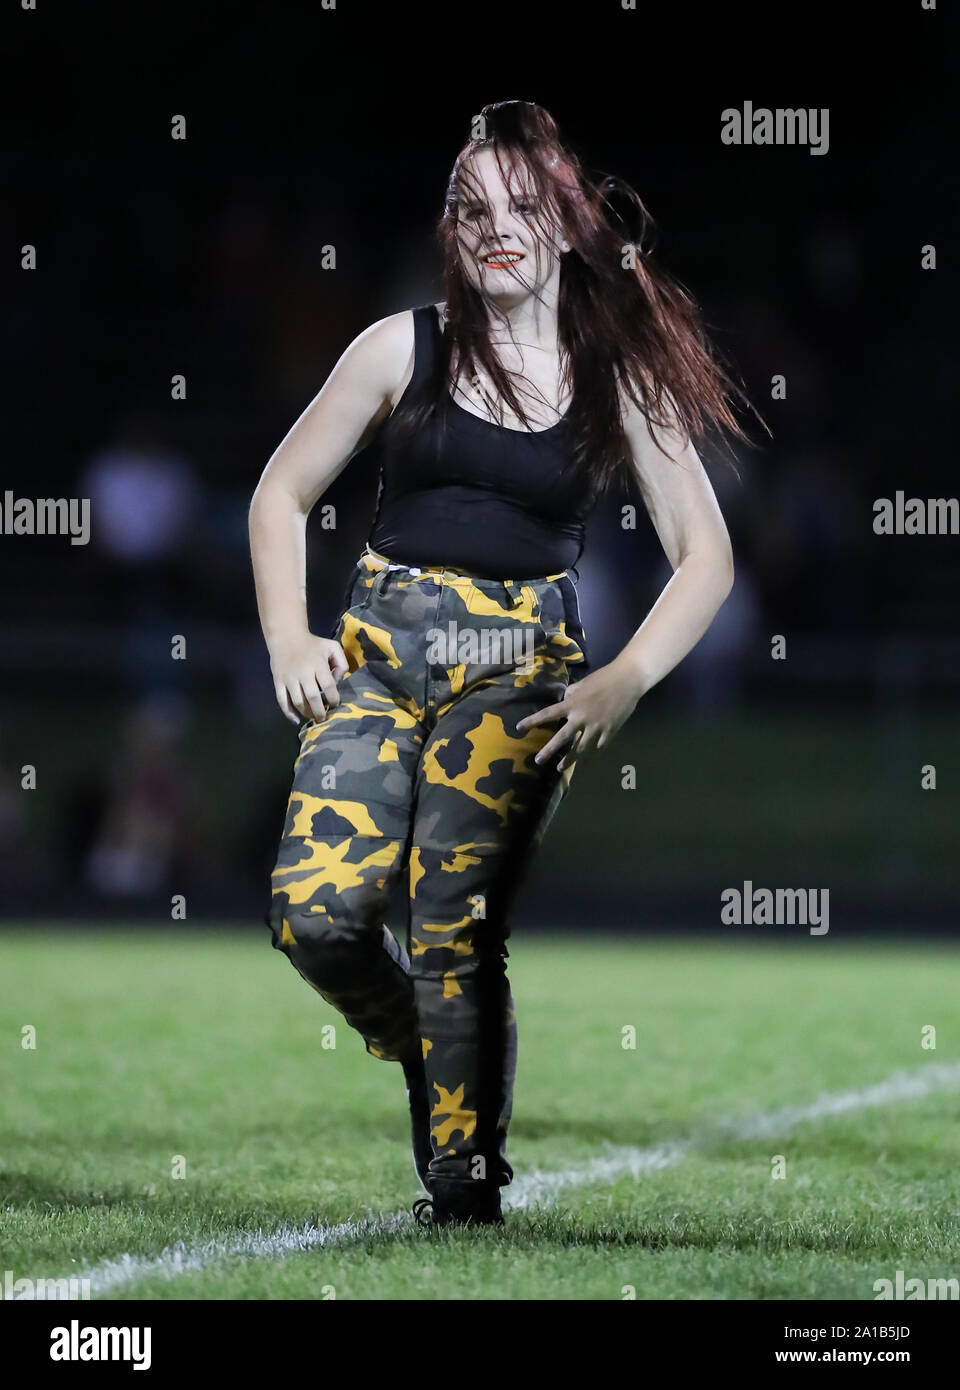 Post Falls High School Dance Team performing during a football game in Post Falls, Idaho. Stock Photo